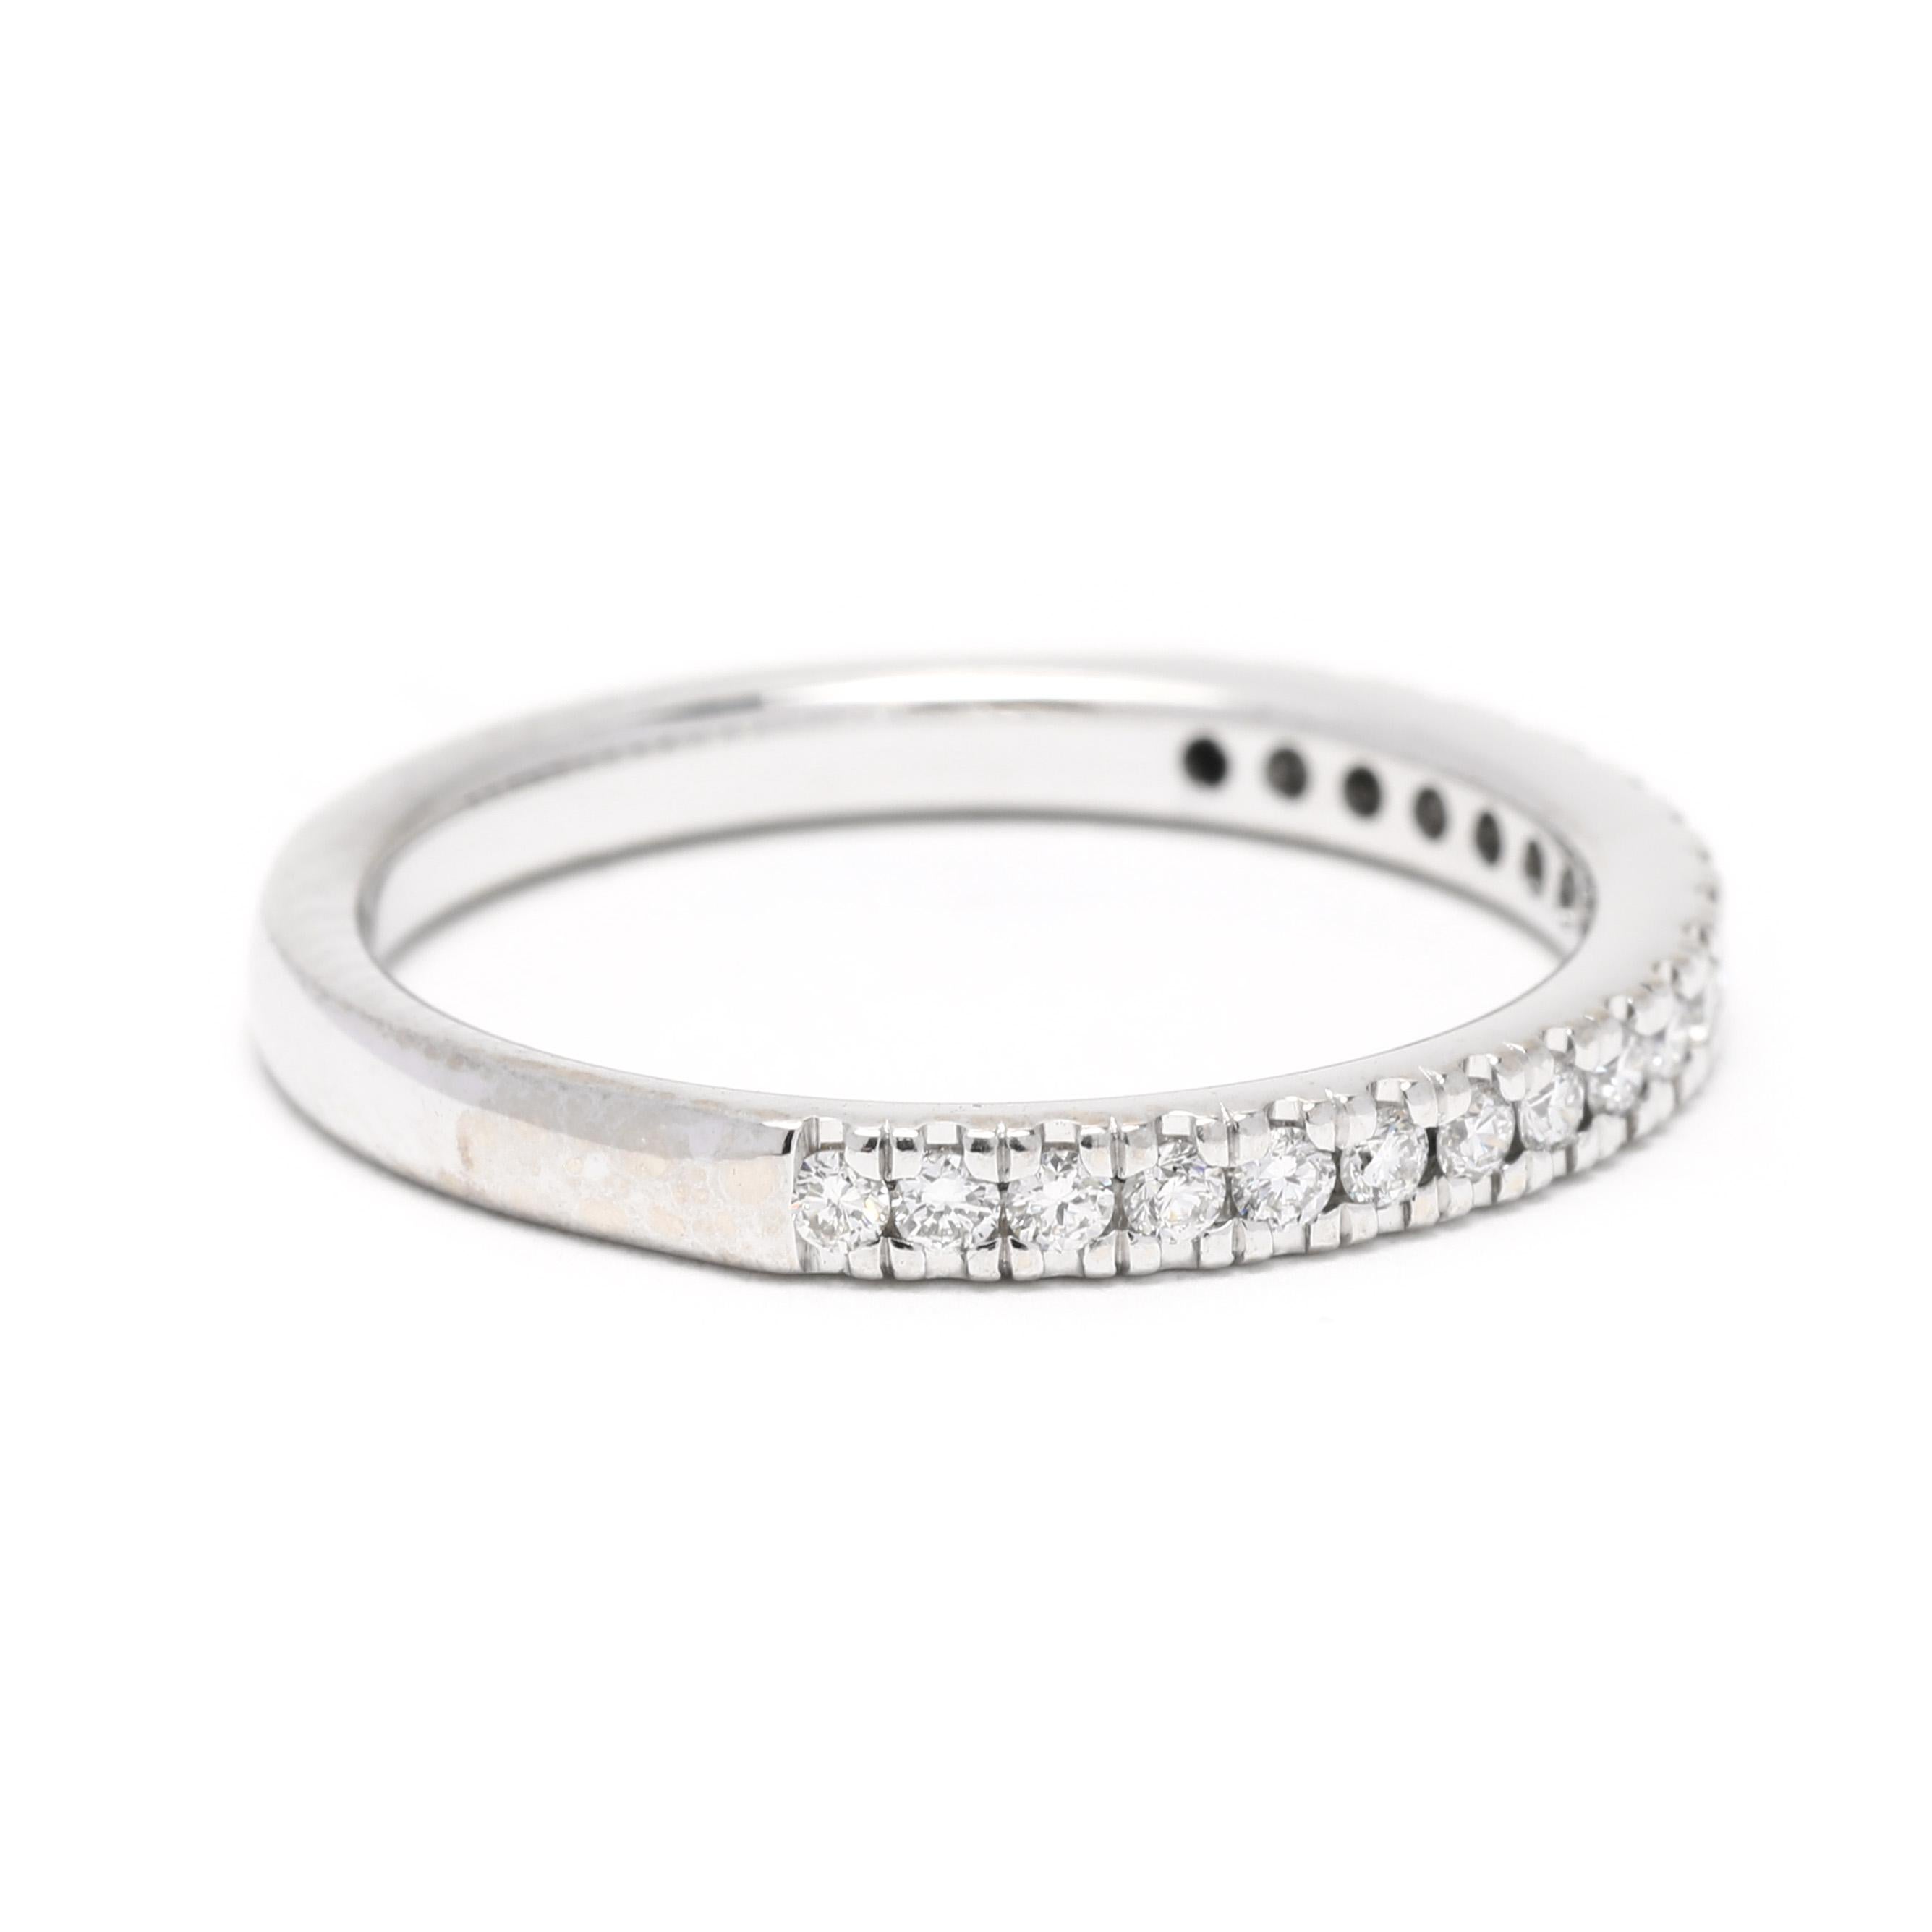 This delicate 0.30ctw diamond wedding band is perfect for the modern bride. Crafted from 14K white gold, this thin diamond band is stackable and features 0.30 ctw of round brilliant diamonds. The ideal wedding ring for the minimalist bride, this